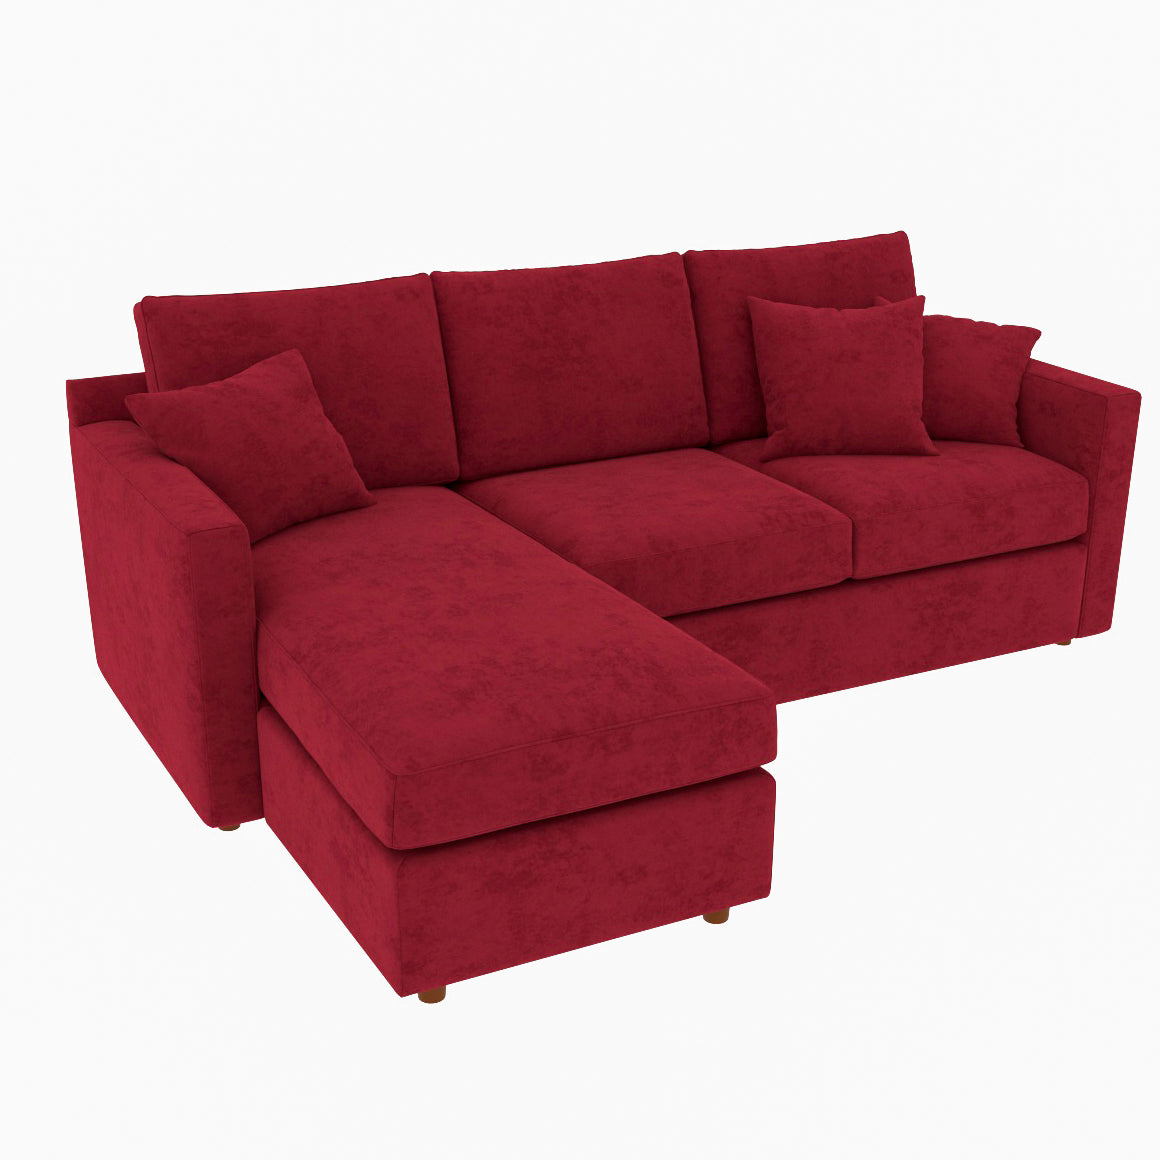 Red Cherry Coloured with Premium Comfort L Shaped 4 Seater Sofa Set for Home Sofa